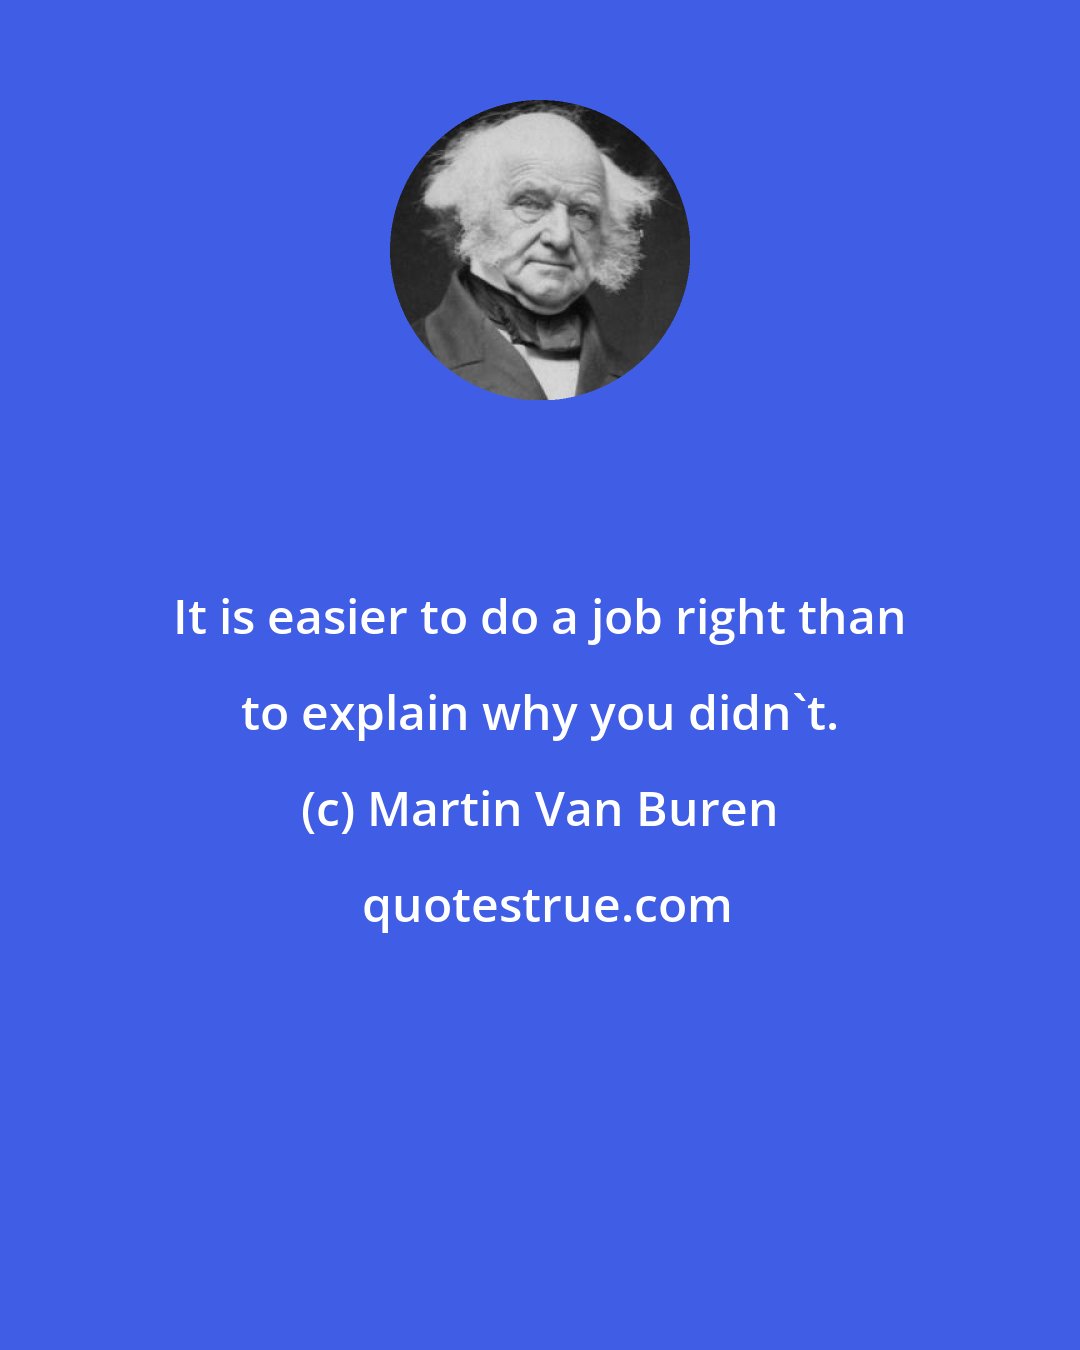 Martin Van Buren: It is easier to do a job right than to explain why you didn't.